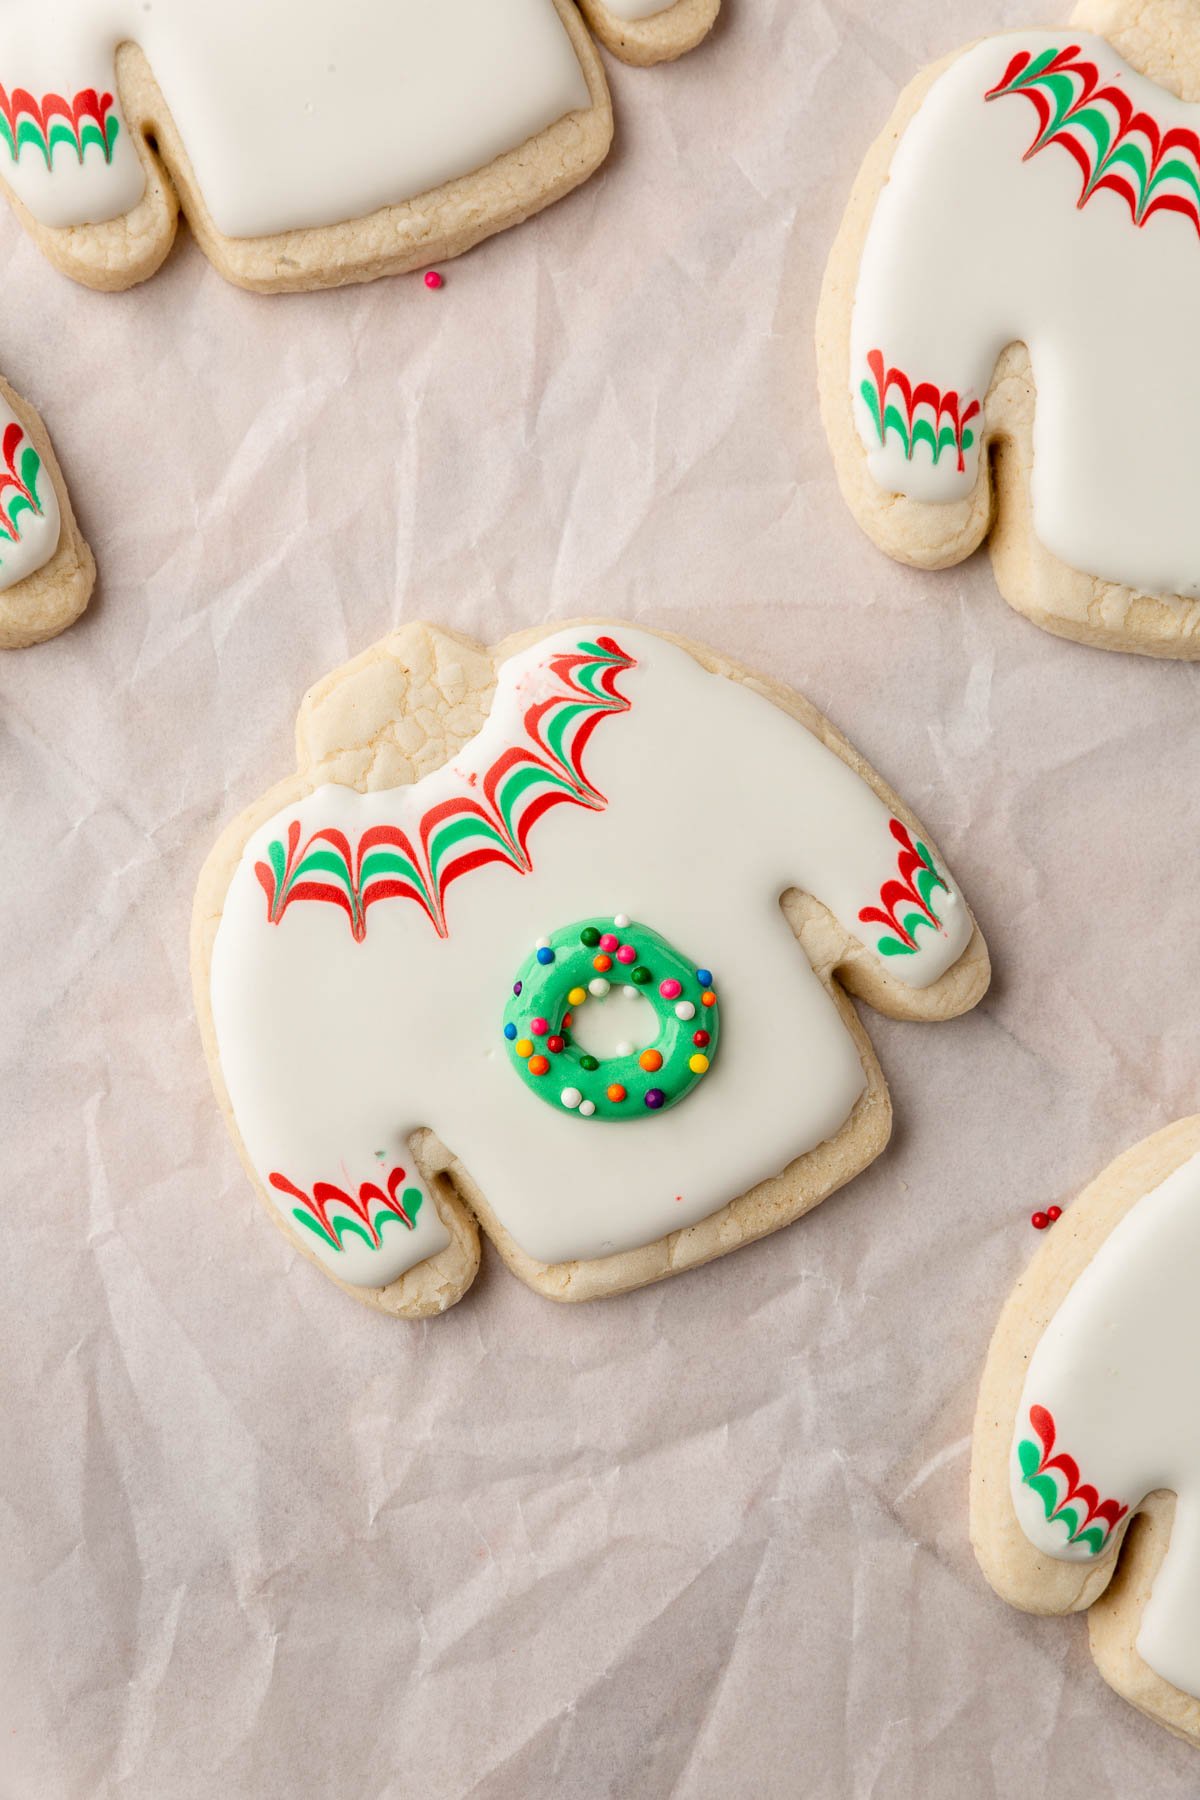 A gluten free ugly sweater sugar cookie with white royal icing and red and green chevron stripes with a green wreath in the center sprinkled with rainbow nonpareil sprinkles.